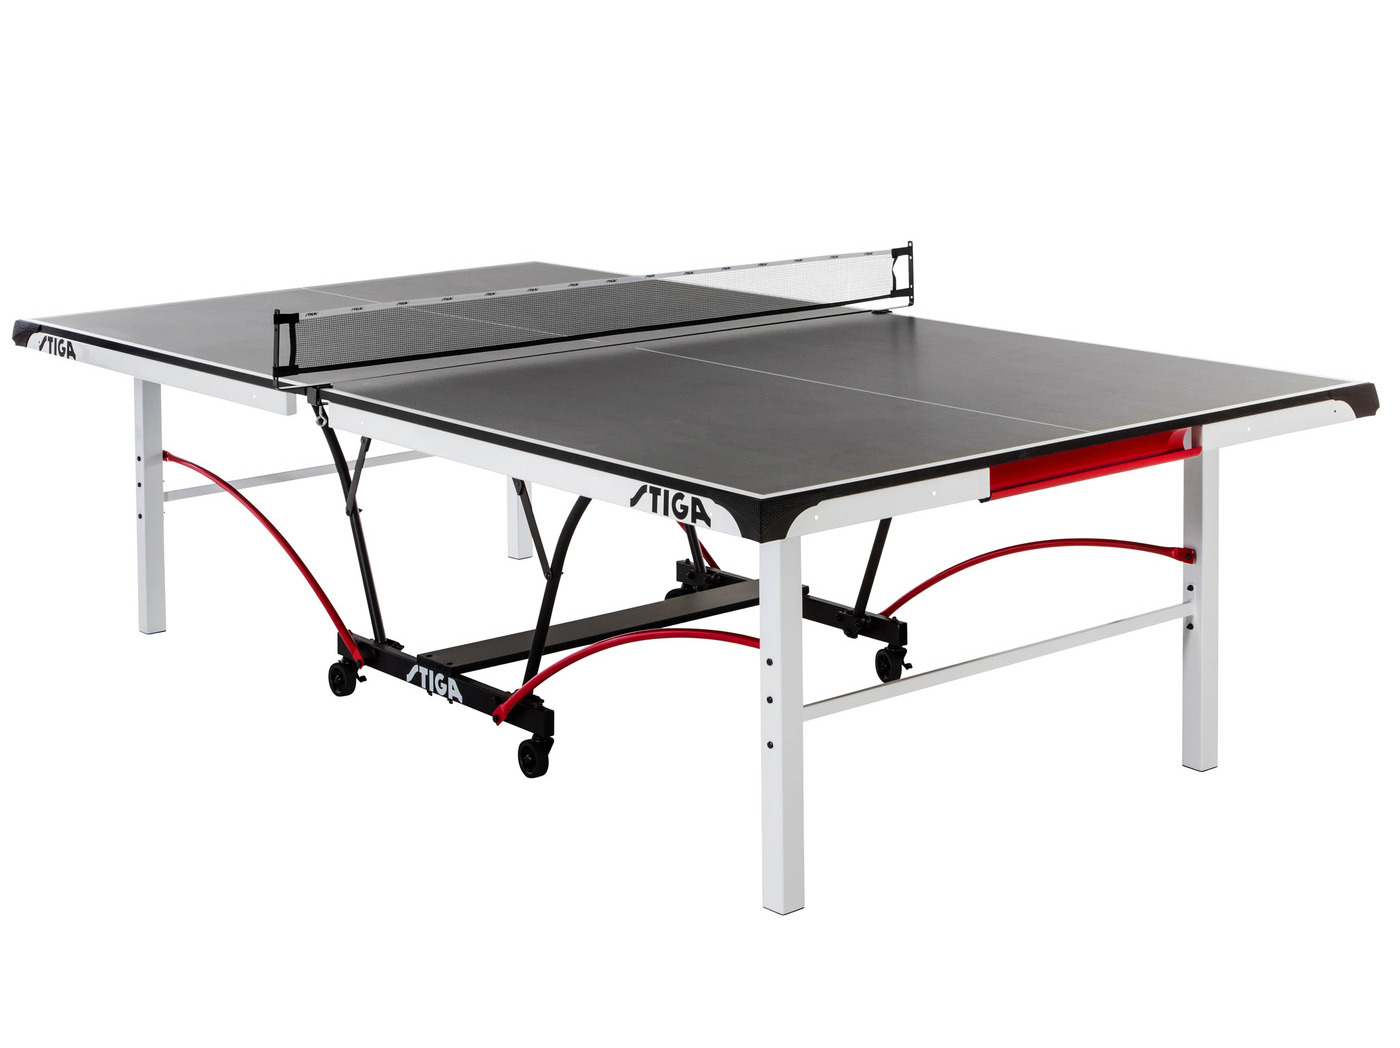 How To Fold A Stiga Ping Pong Table